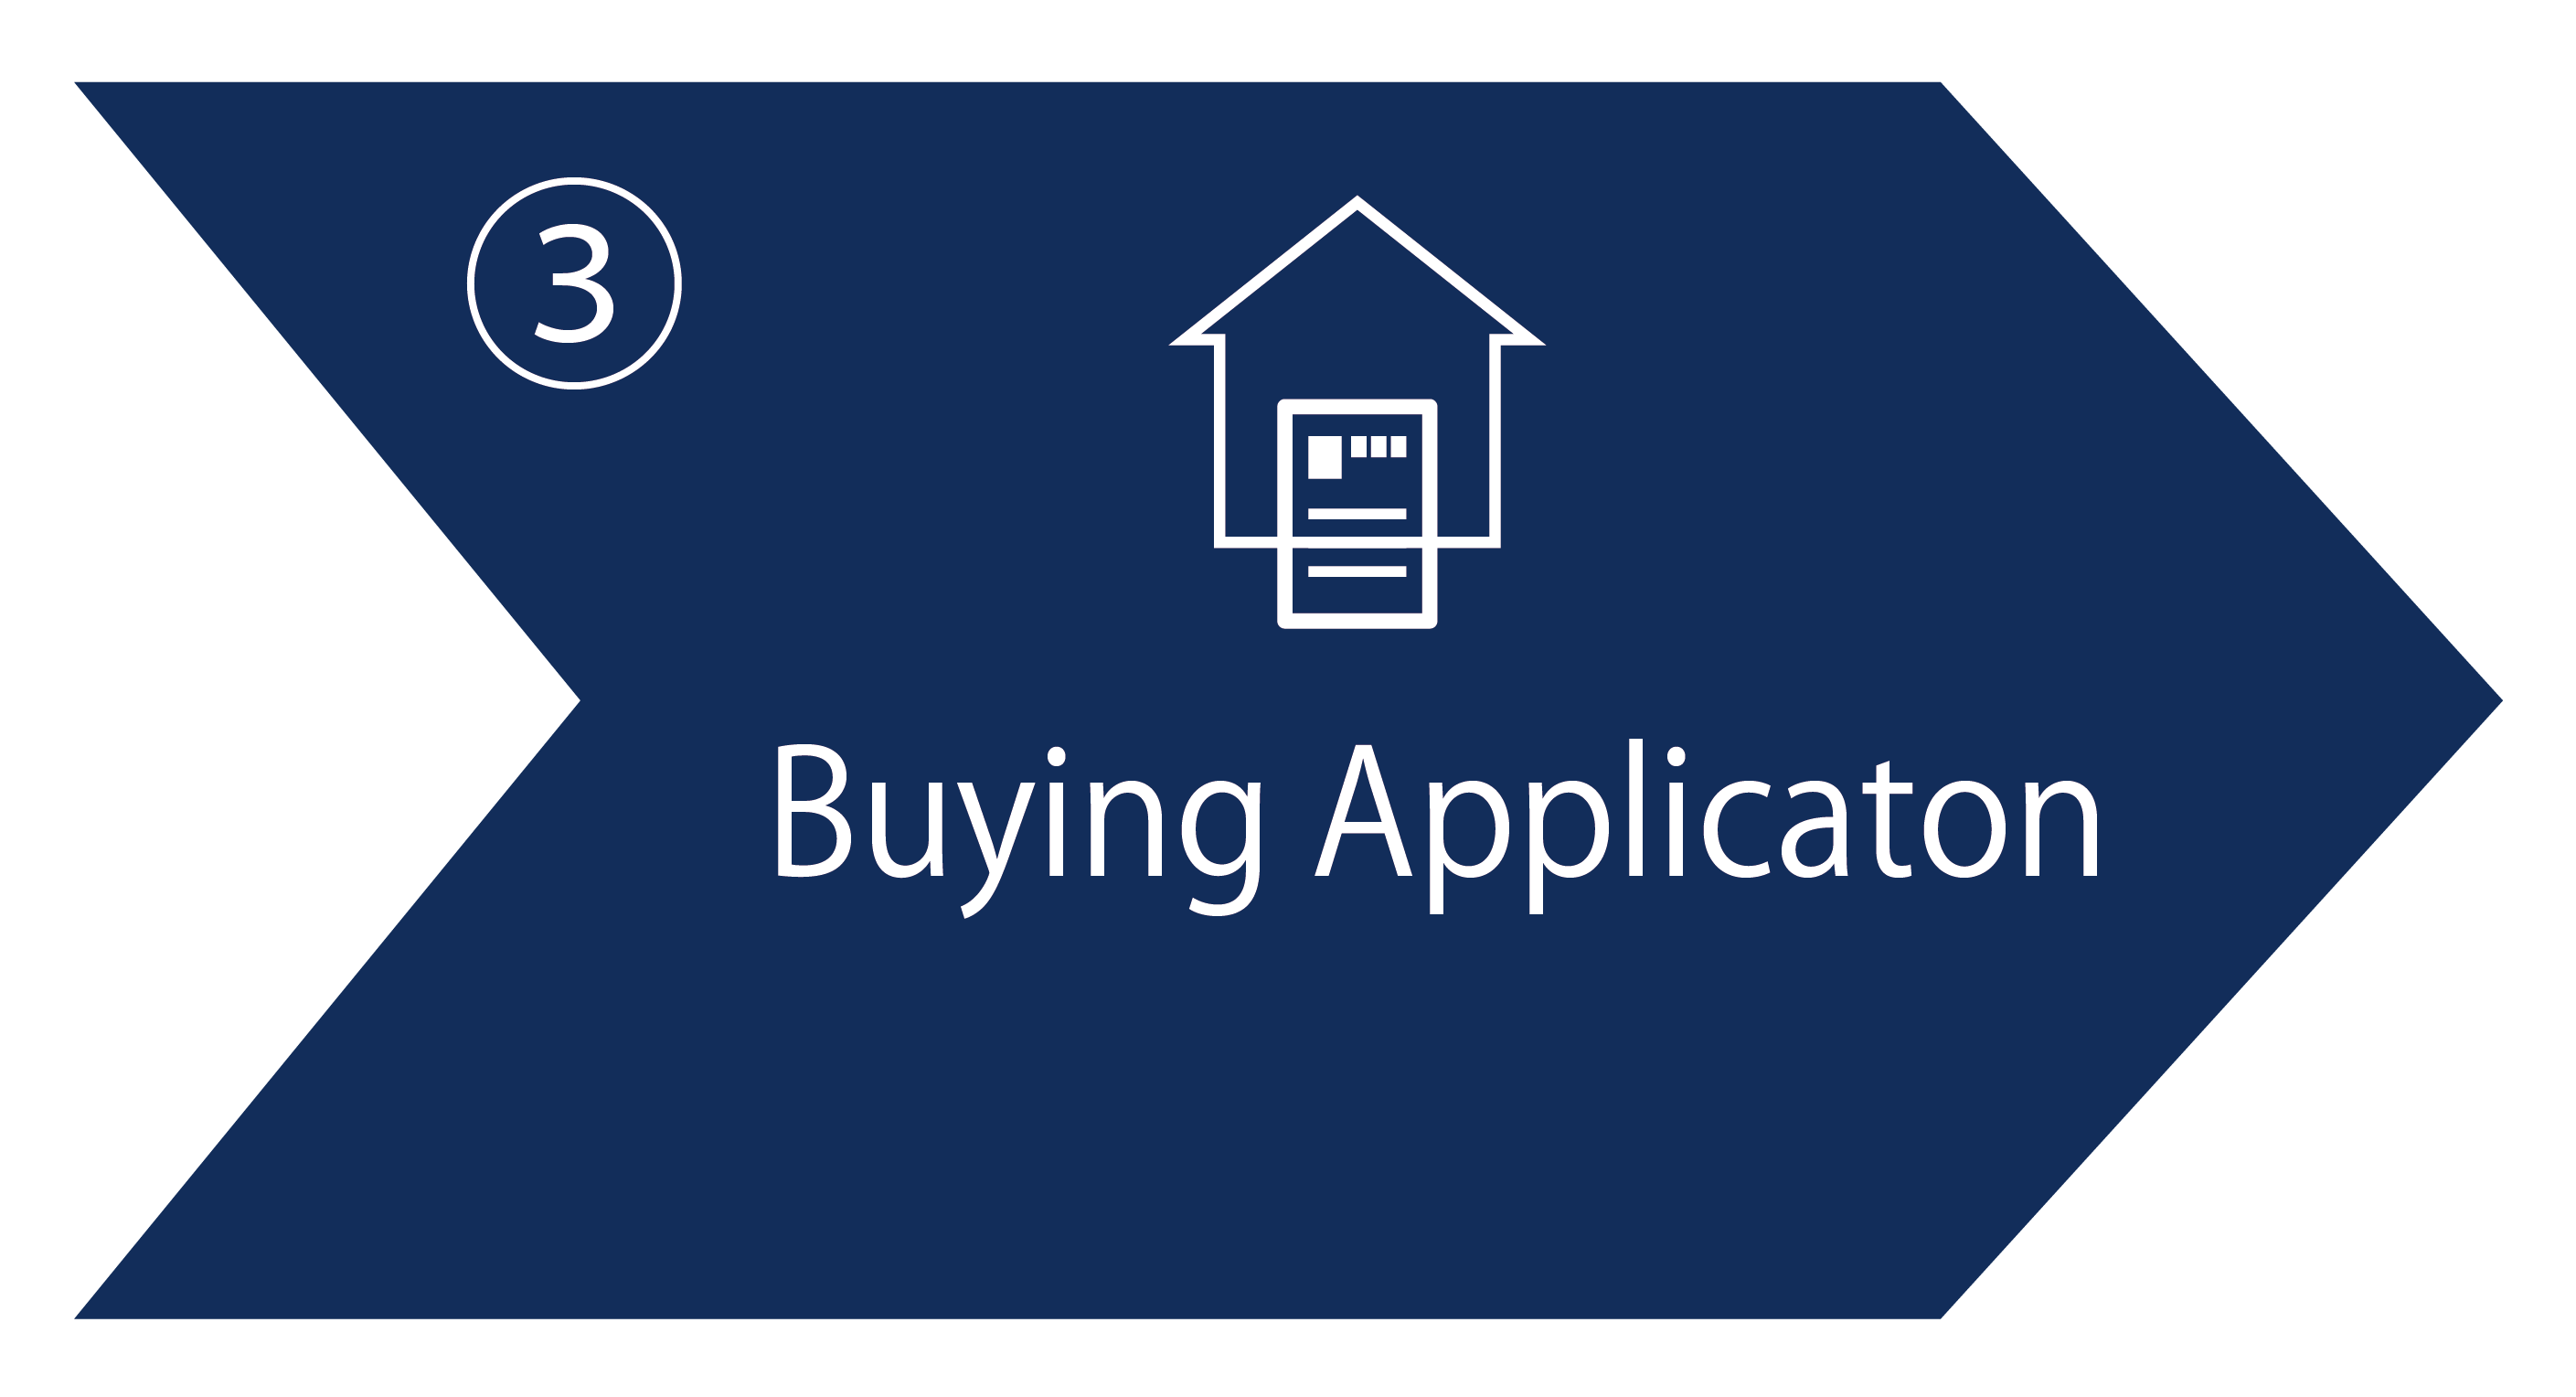 Buying Application